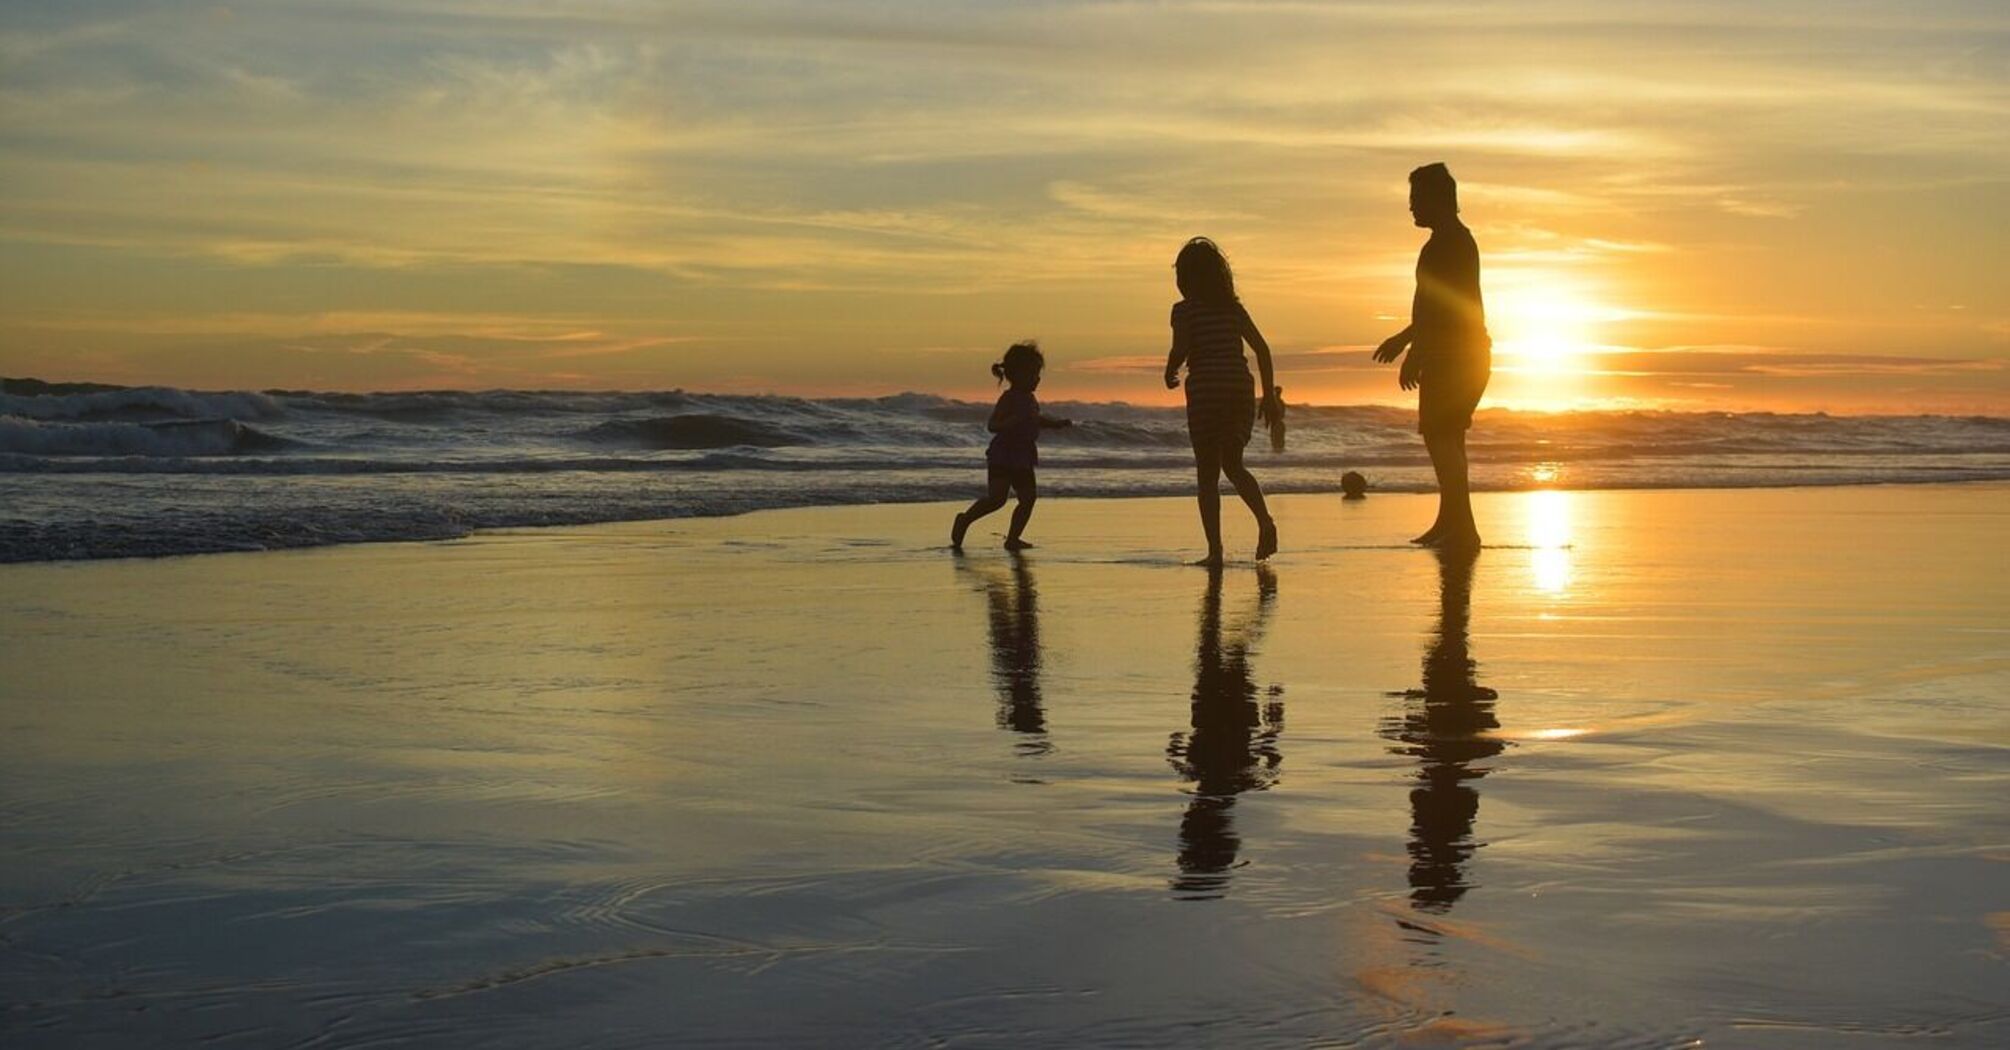 Top 5 best destinations for families with children that will give you romantic memories